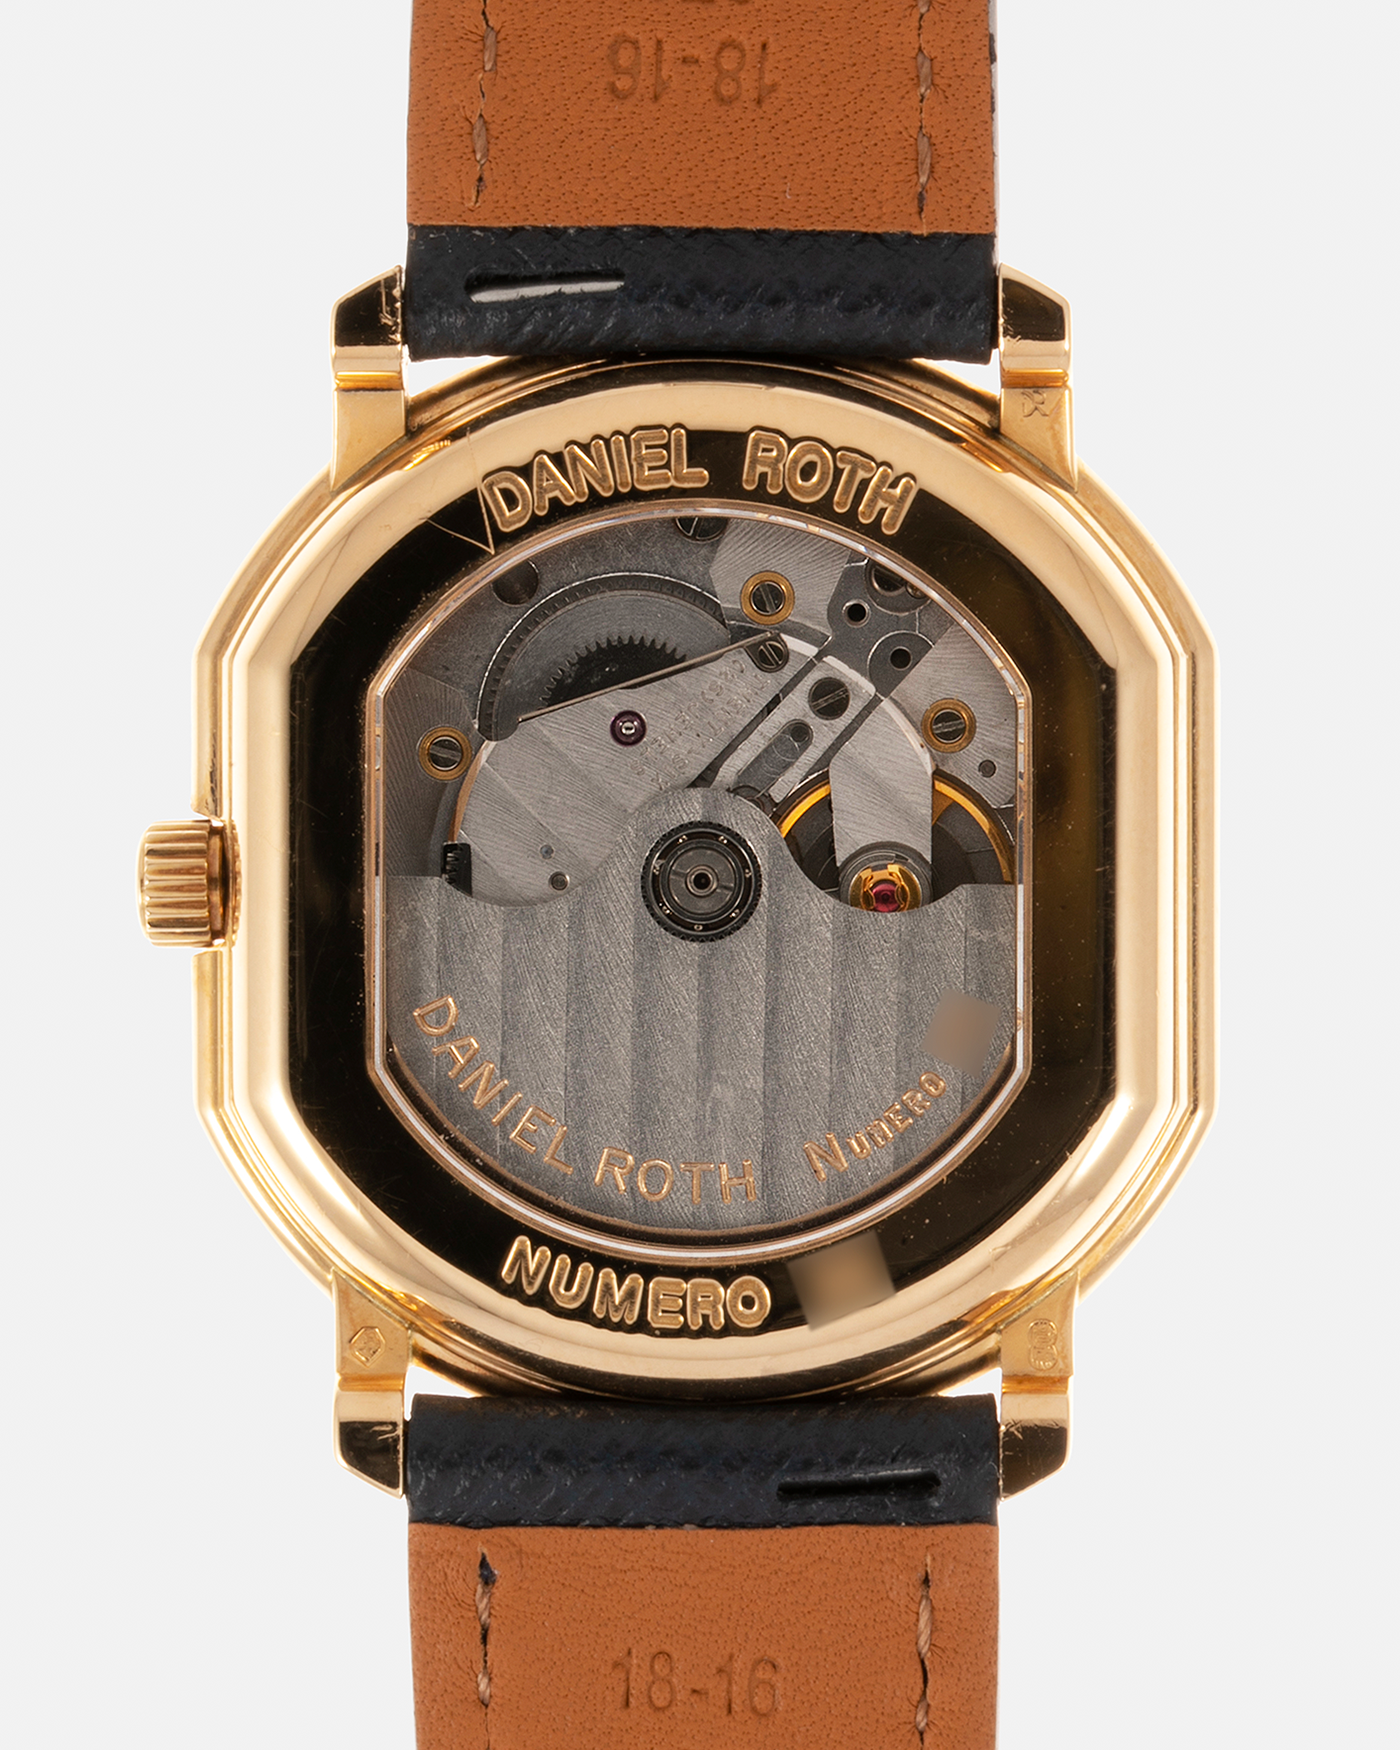 Brand: Daniel Roth Year: 1990’s Model: Seconds at Six, Mid-Size Material: 18-carat Yellow Gold  Movement: Lemania Cal. 1918, Self-Winding Case Dimensions: 35mm x 32mm Lug Width: 18mm Strap: Molequin Navy Textured Calf Leather Strap with Generic Stainless Steel Tang Buckle